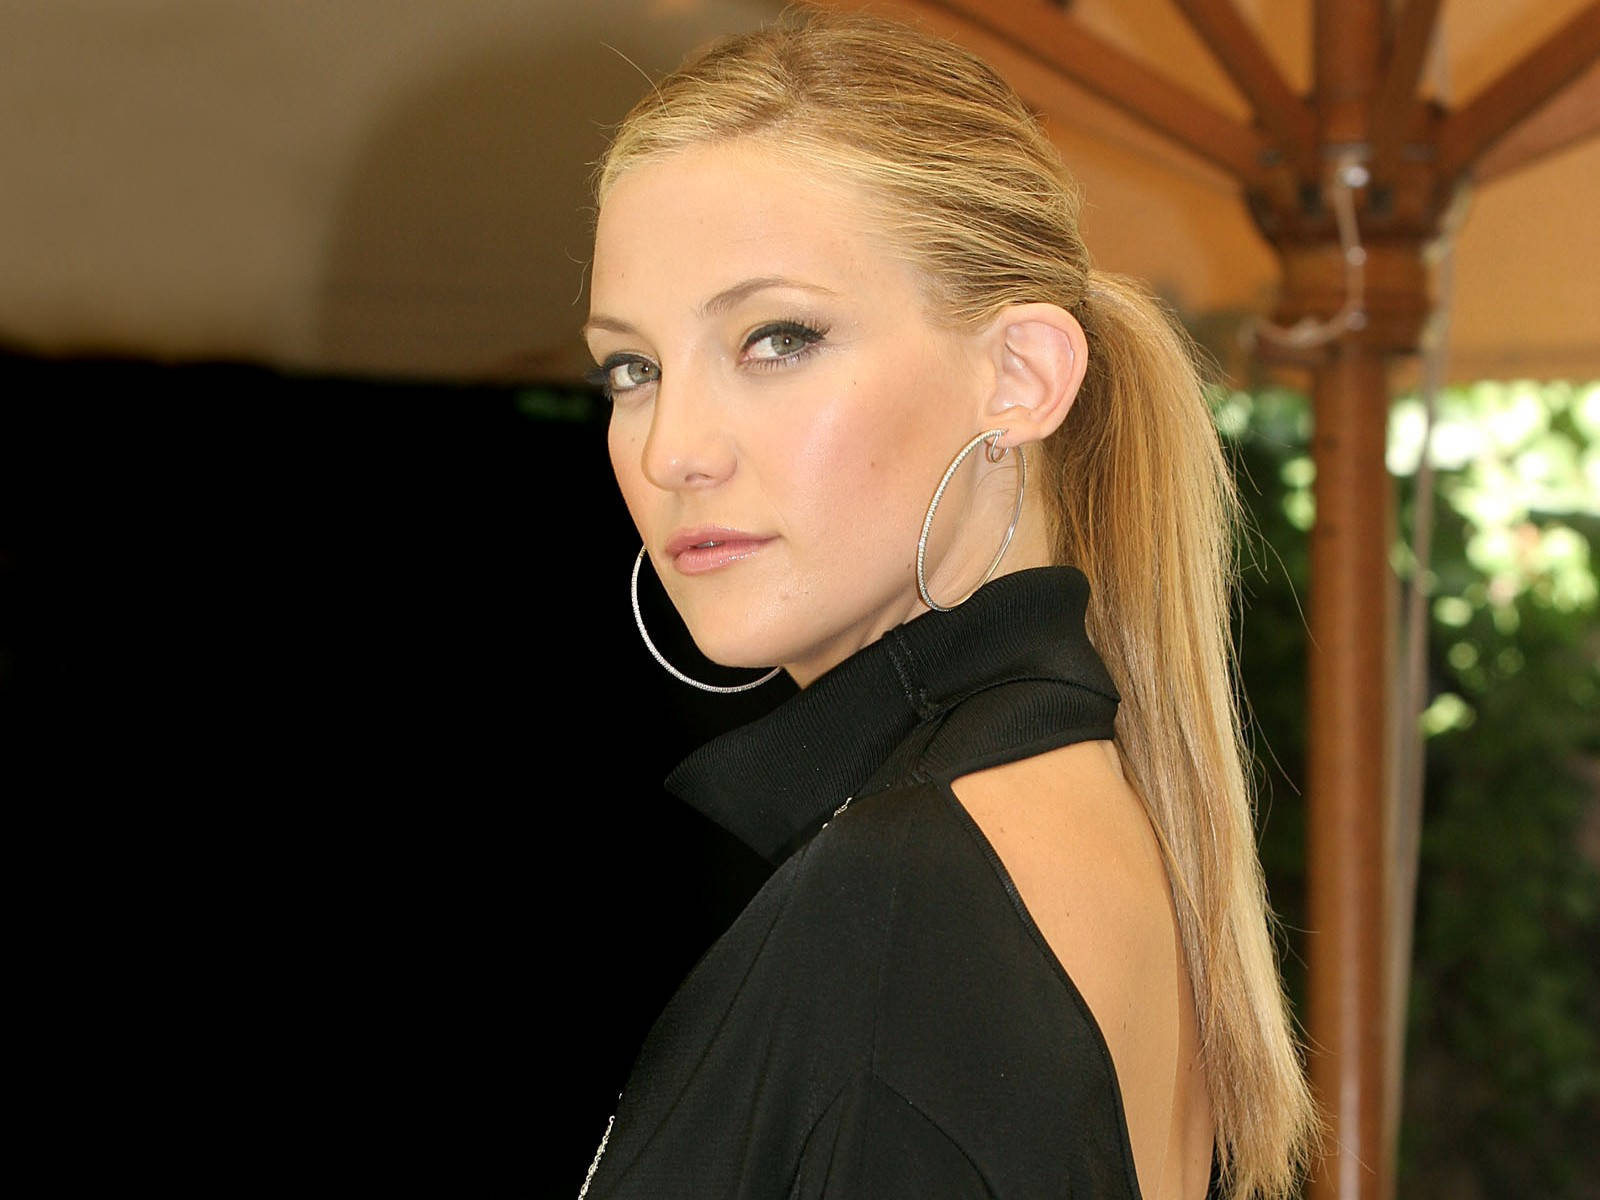 A Stunning Image Of Kate Hudson Features Her Elegant Looks With Her Long Blonde Hair And Black Outfit